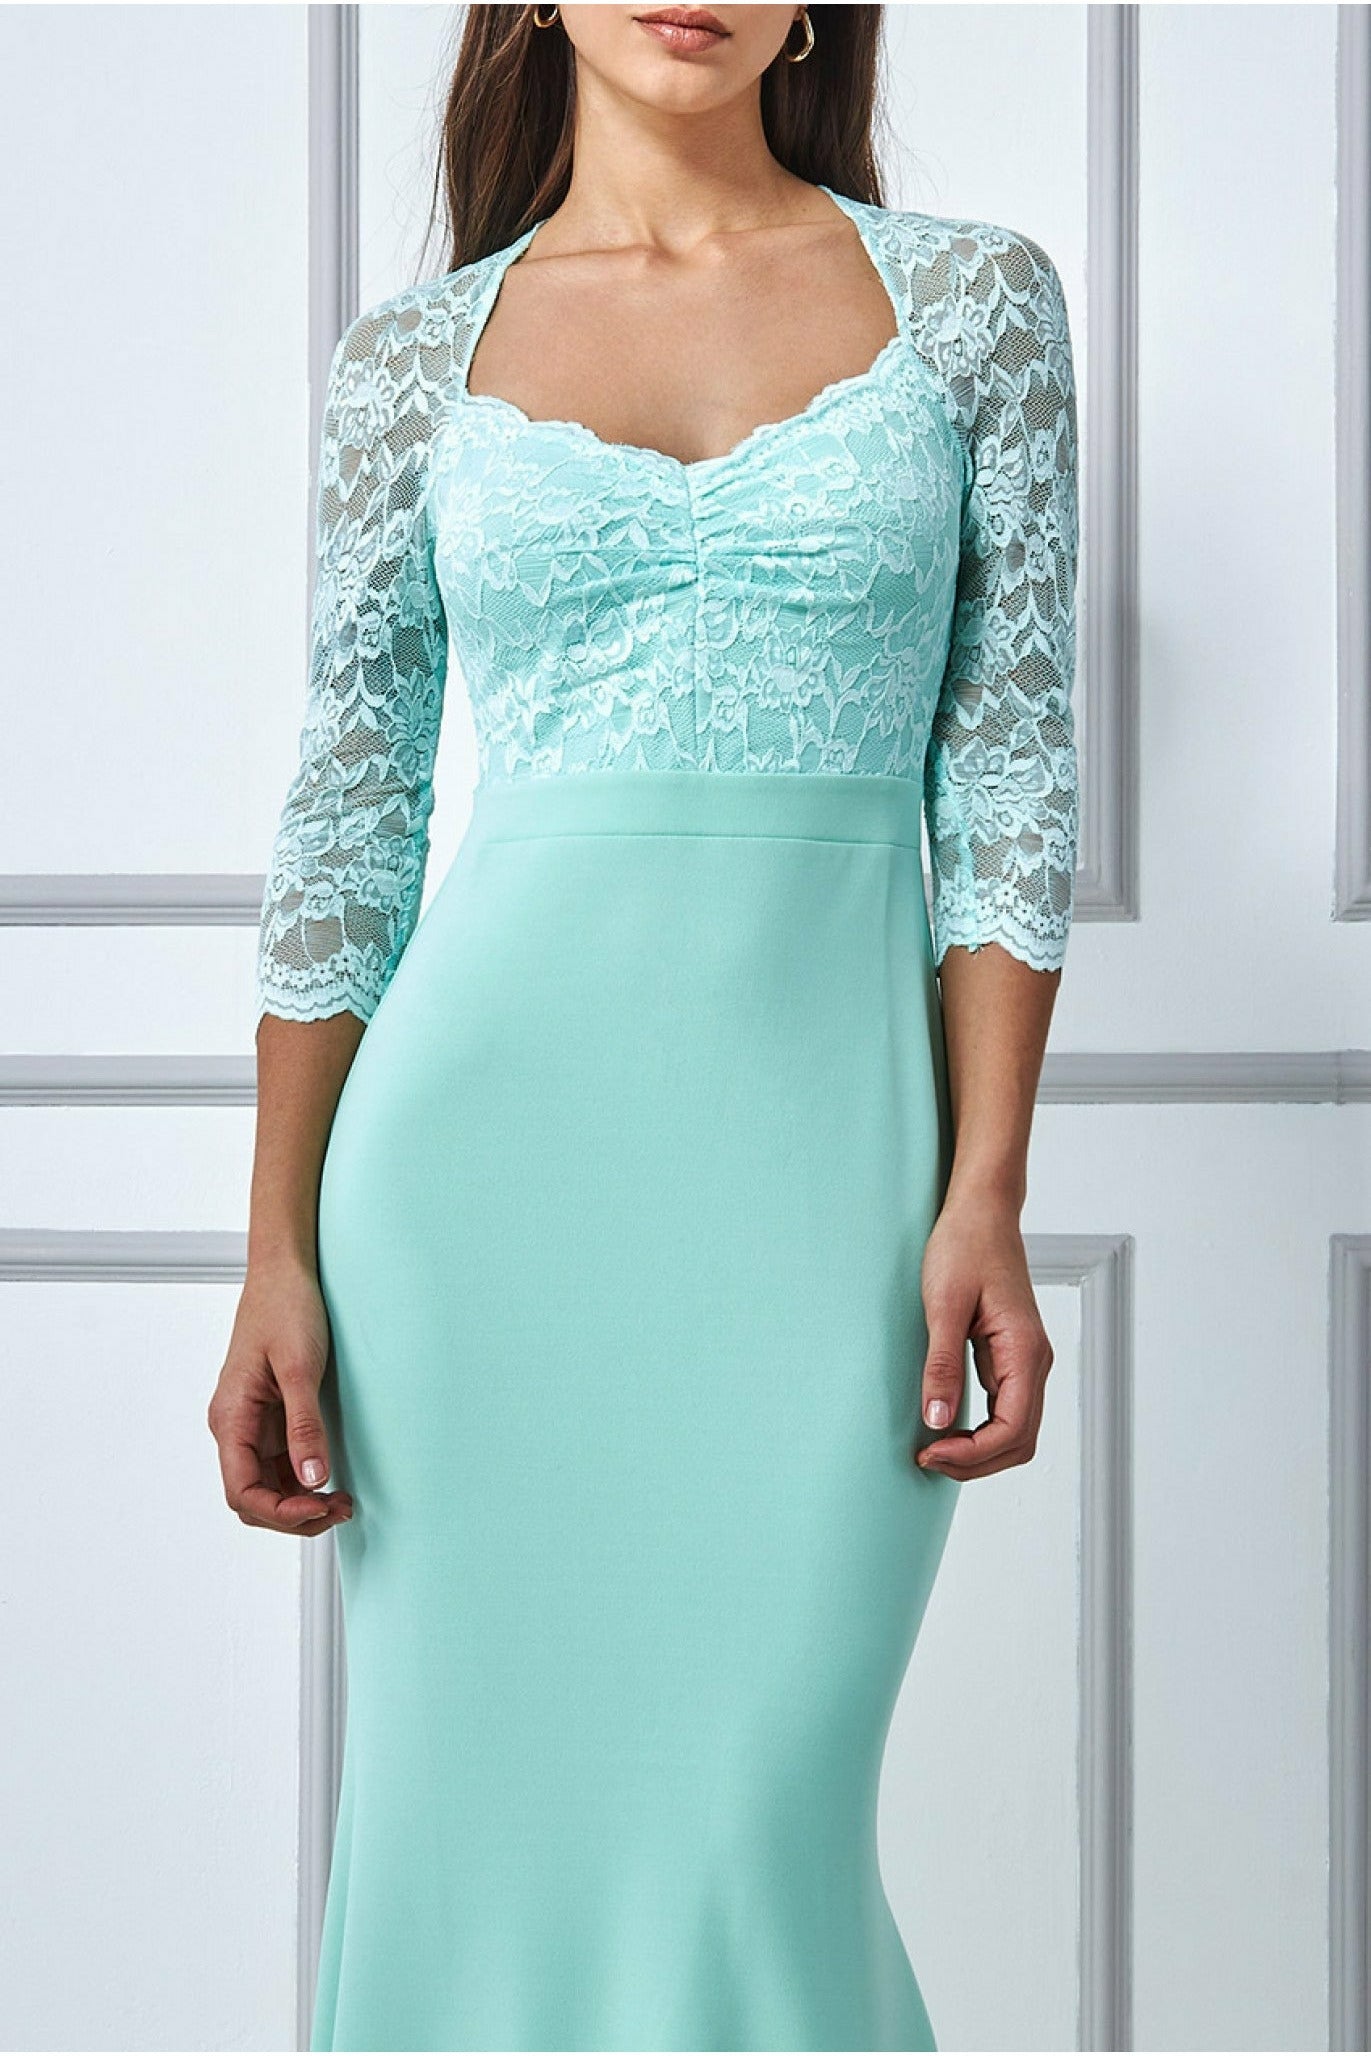 Lace Bodice Maxi Dress With Sleeves - Mint DR1551